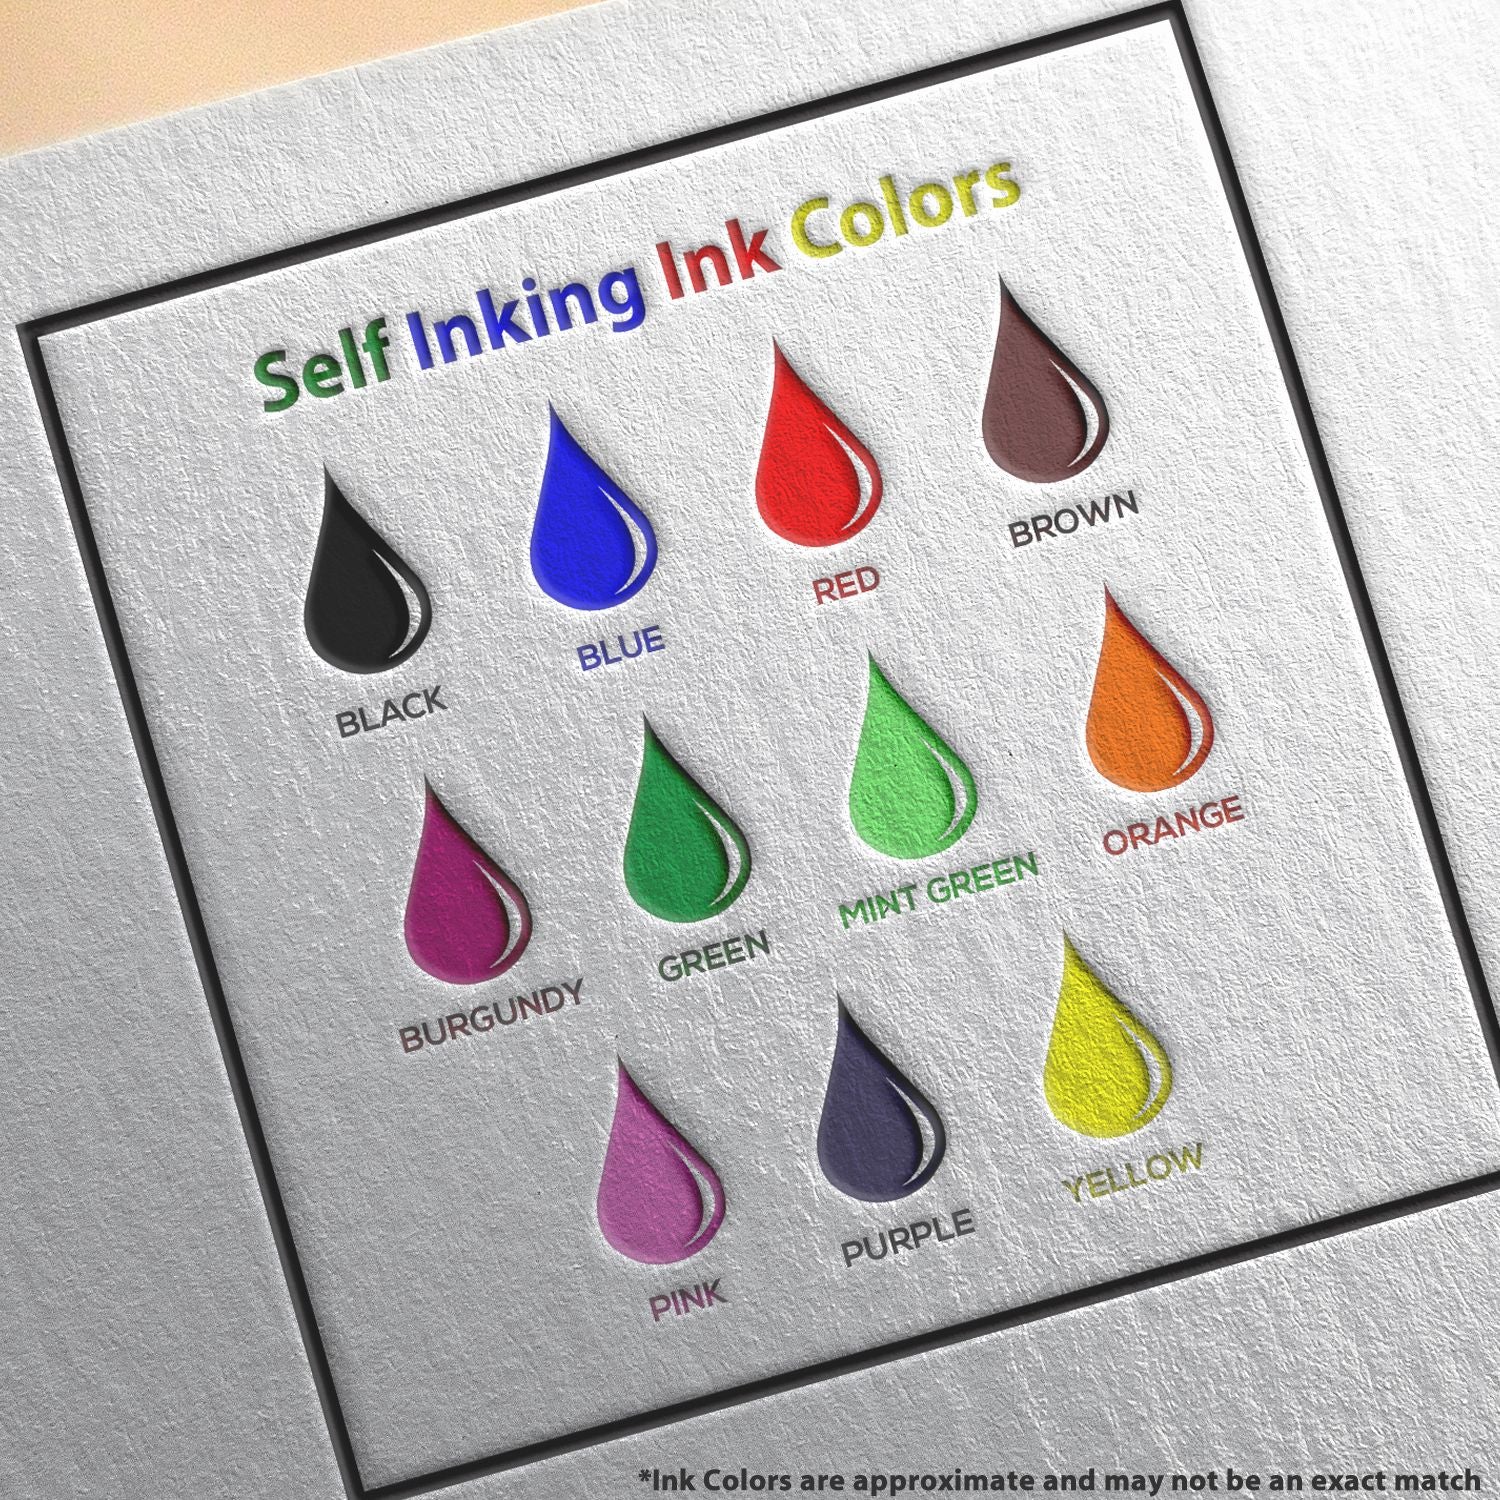 A picture showing the different ink colors or hues available for the Self-Inking Oklahoma PE Stamp product.